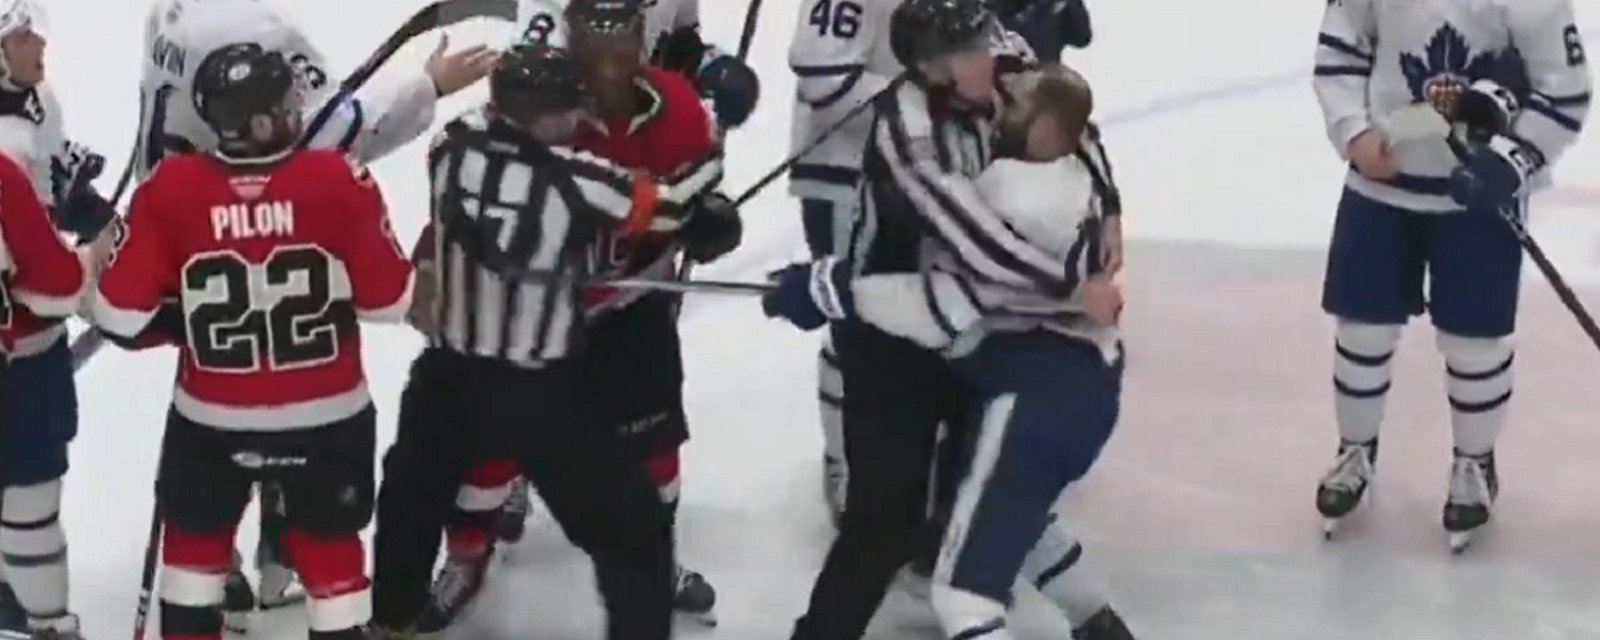 Kyle Clifford snaps and attacks opponent in handshake line.